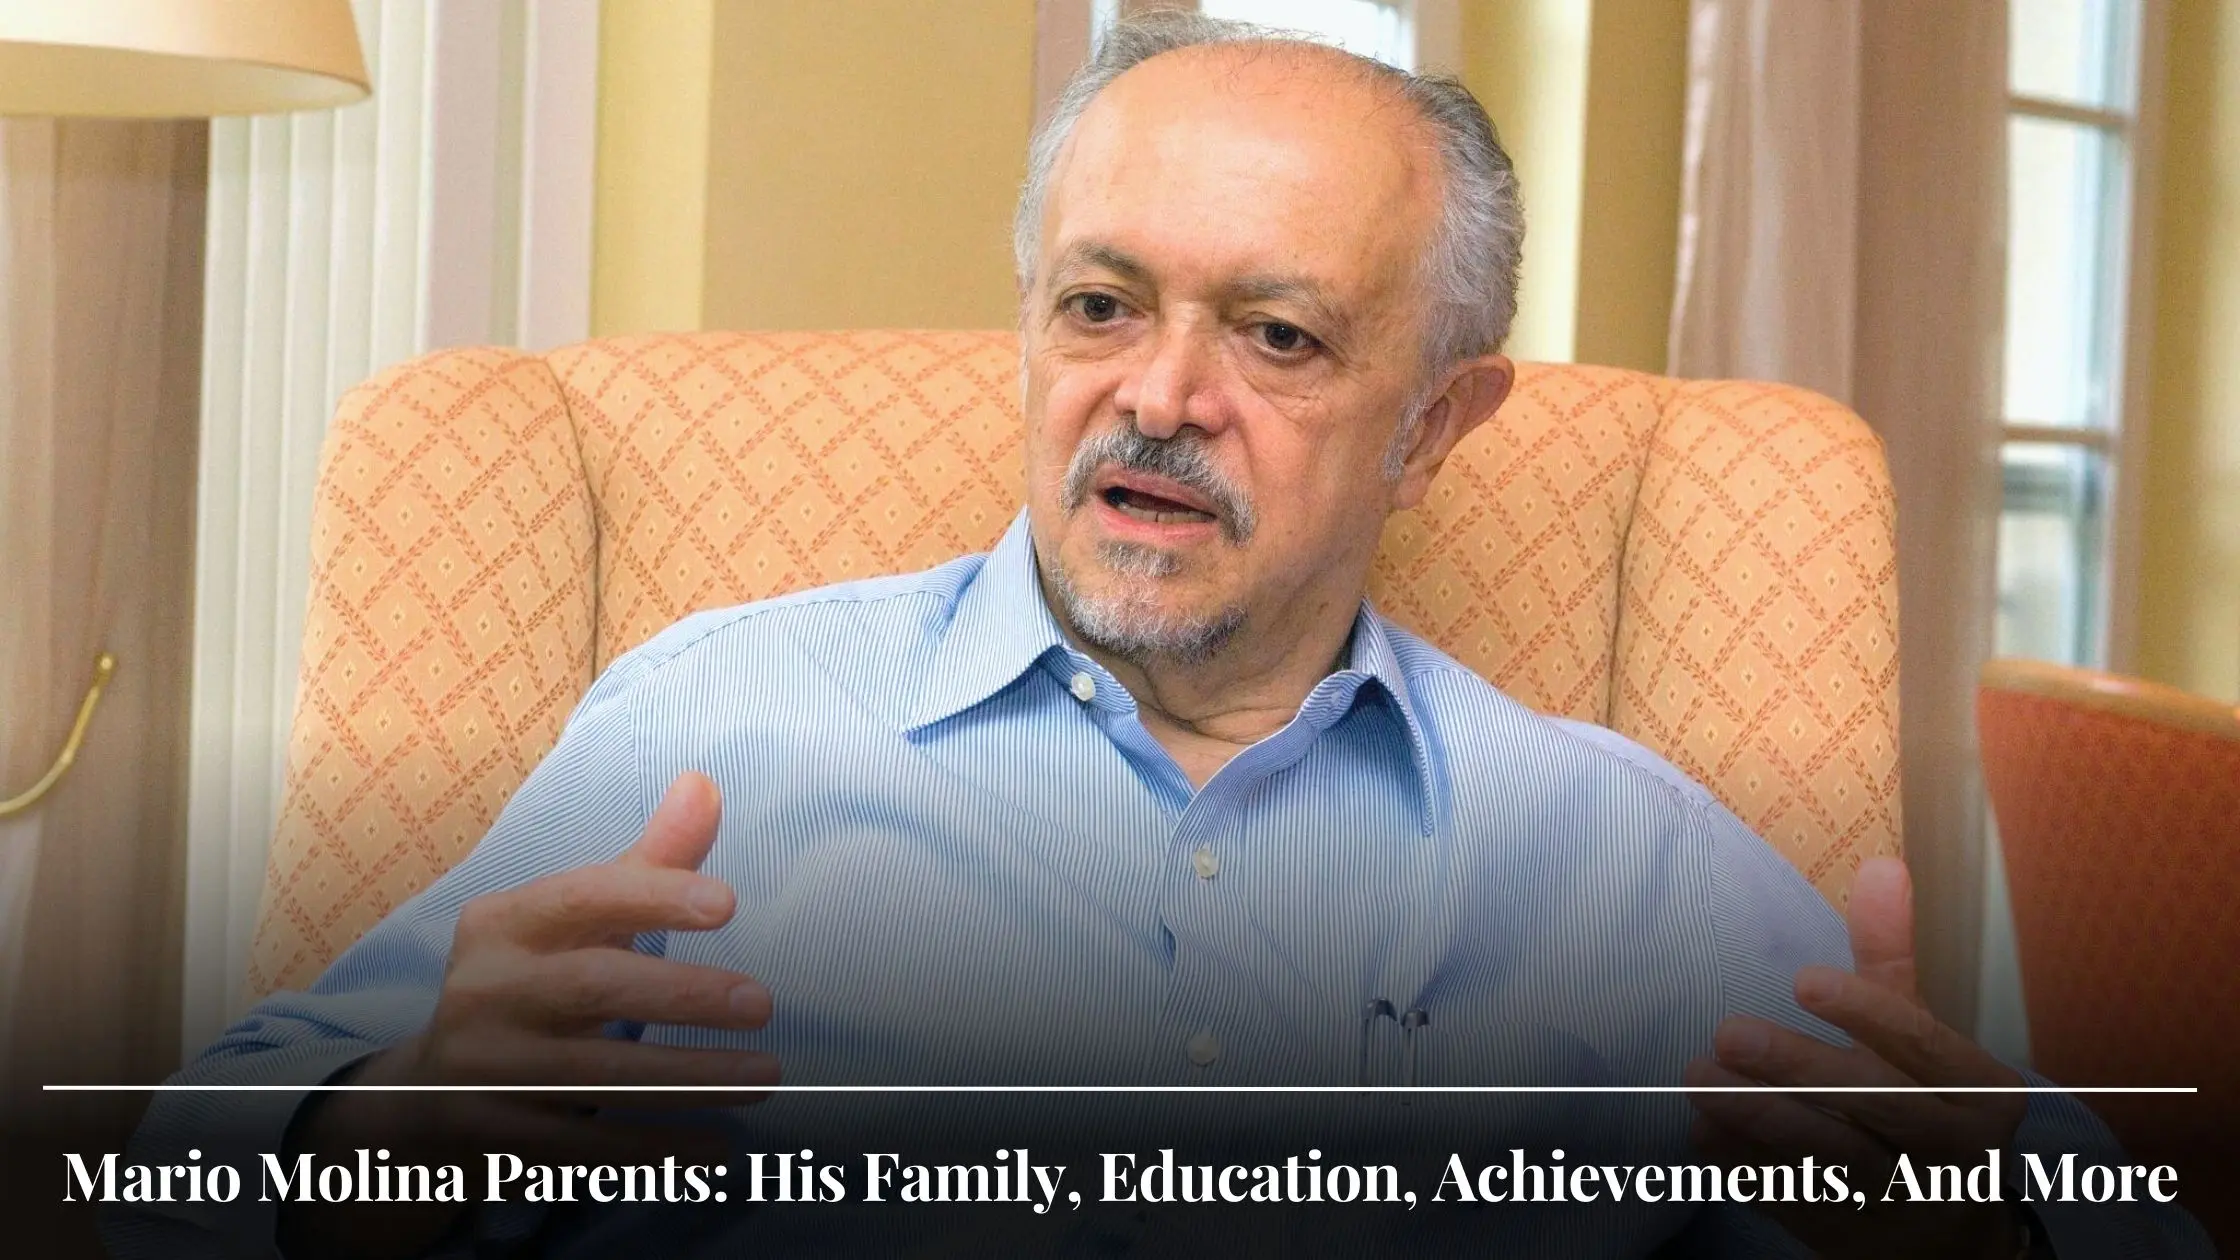 Mario Molina Parents His Family, Education, Achievements, And More